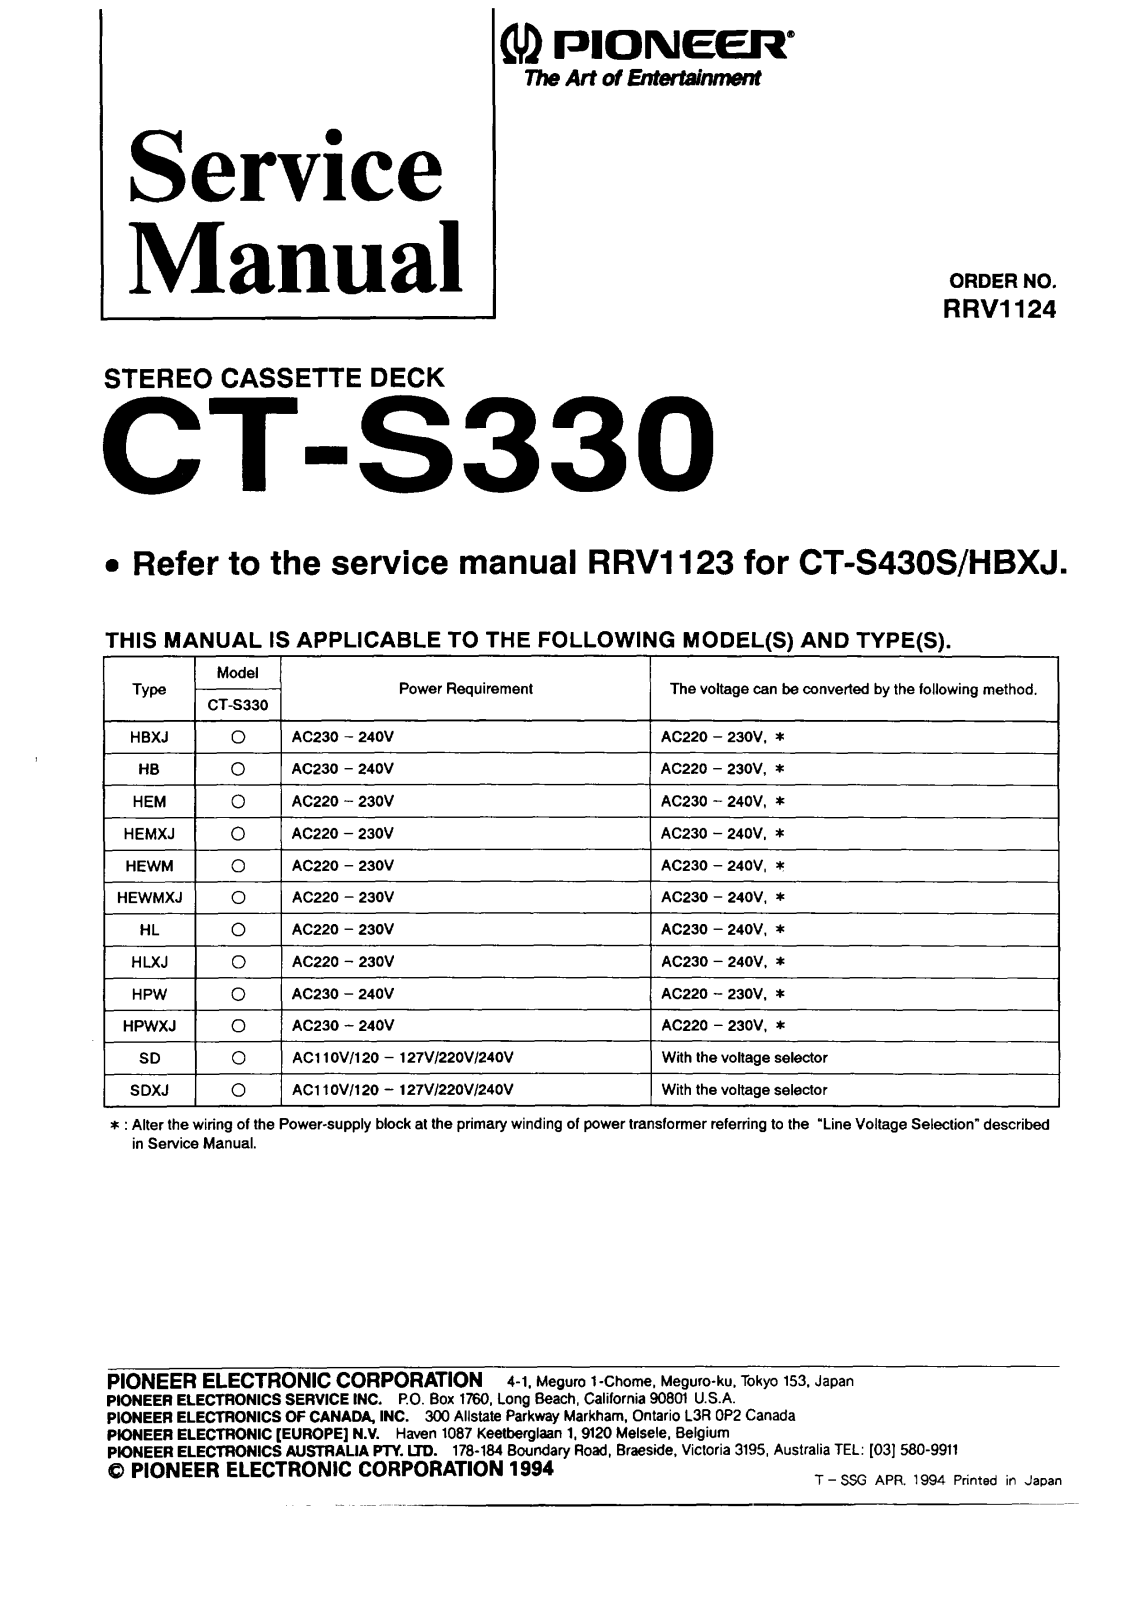 Pioneer CTS-330 Service manual